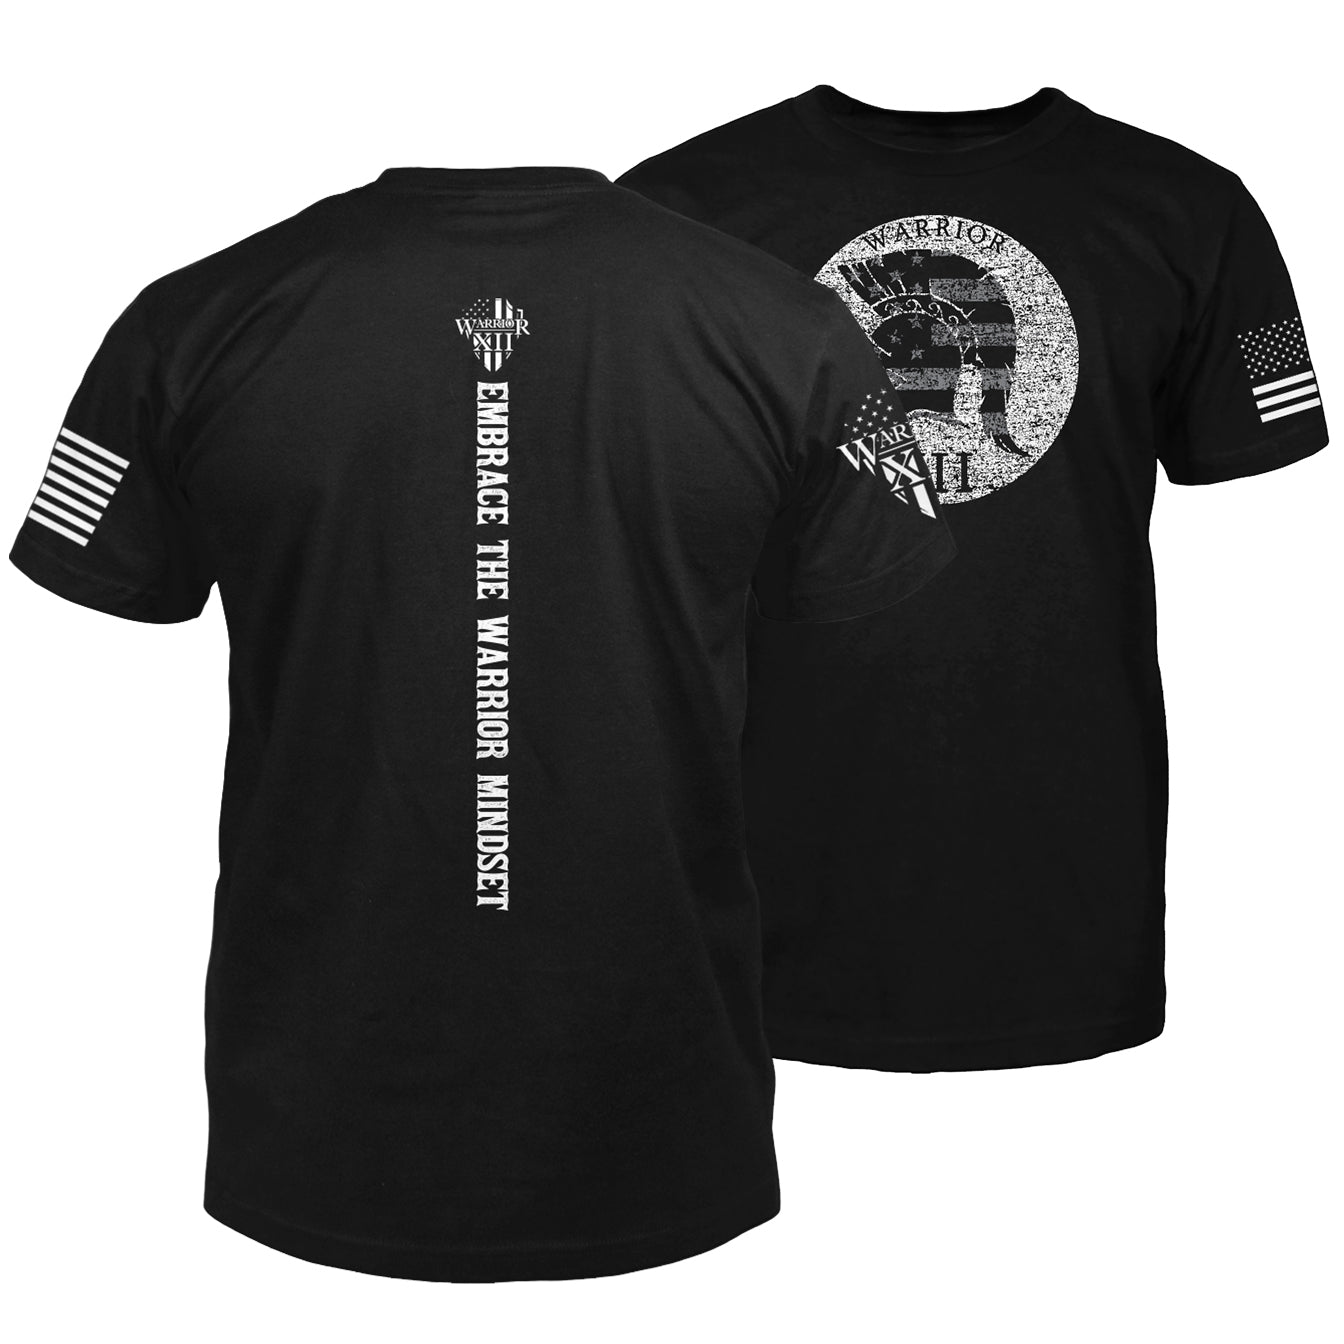 "Warrior Mindset" is printed on a black t-shirt with the main design printed on the front and the back of this t-shirt has a vertical printing of the phrase "Embrace The Warrior Mindset." This shirt features our brand logo on the right sleeve and the American Flag on the left sleeve.